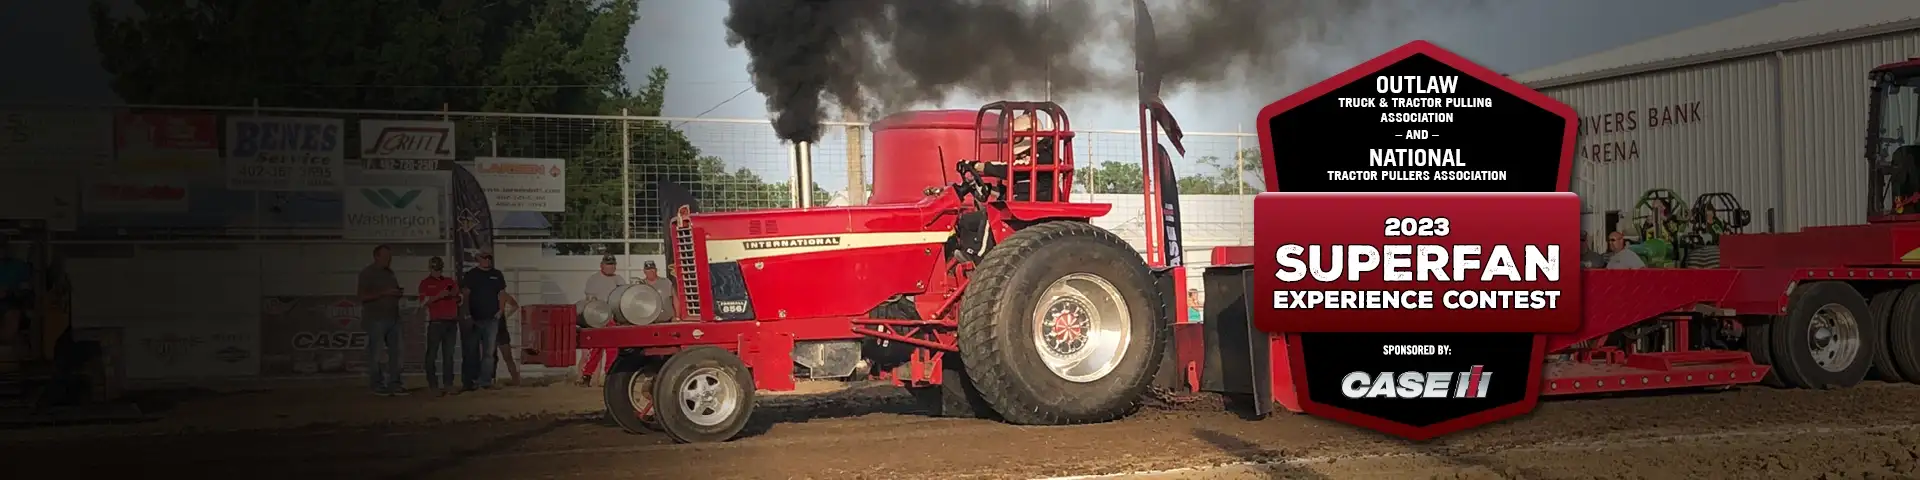 Image of vintage international harvester tractor at a tractor pull